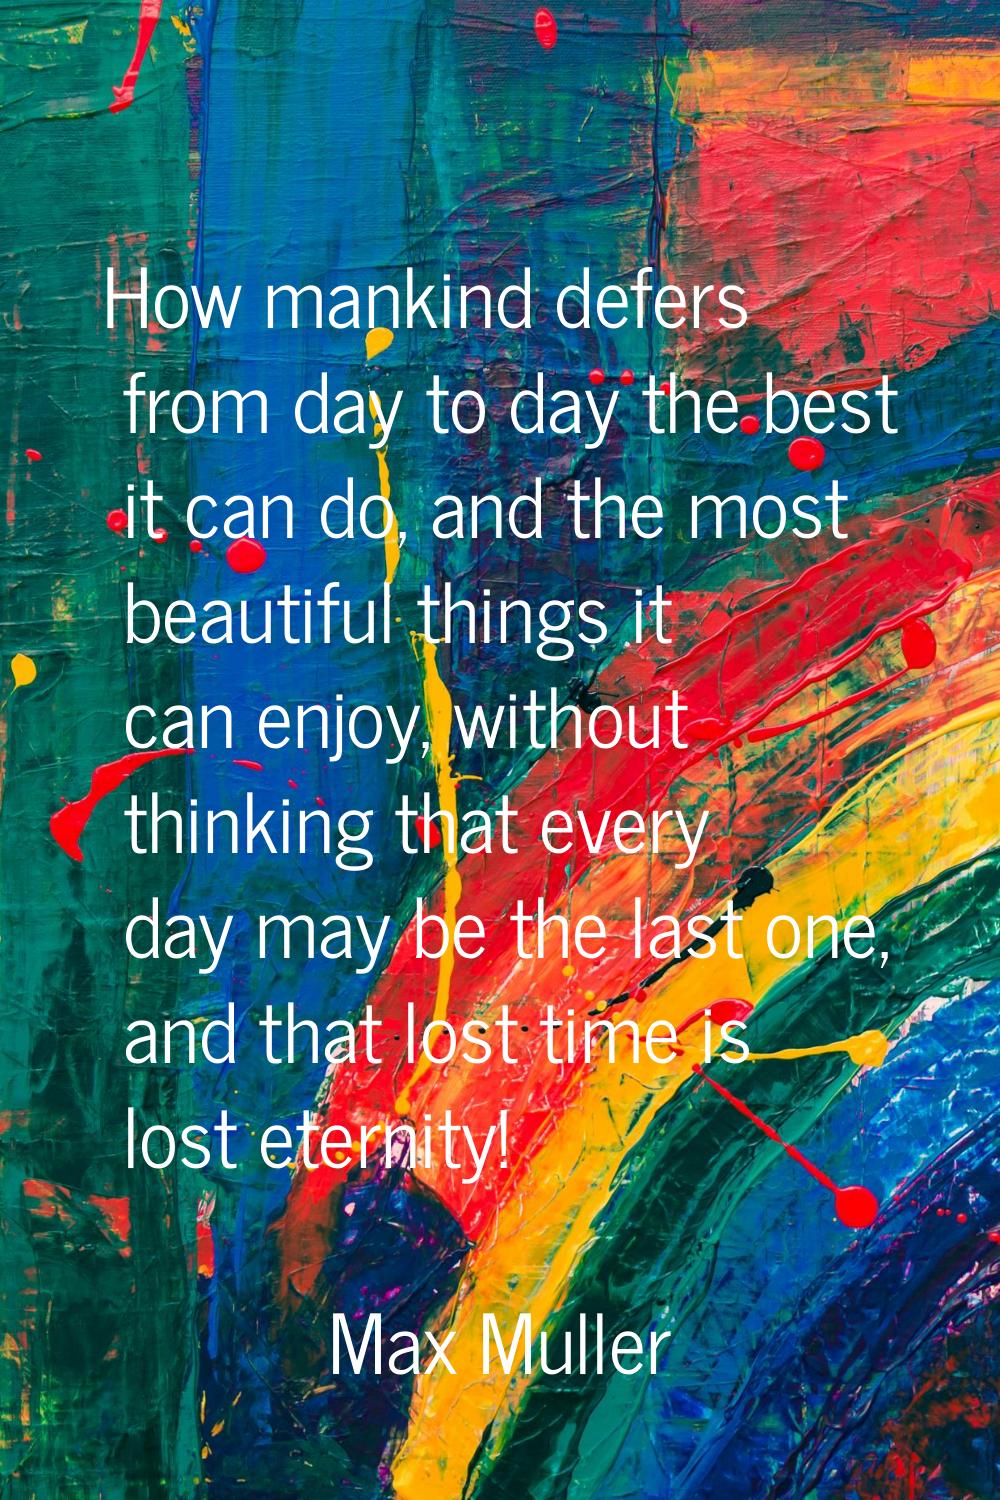 How mankind defers from day to day the best it can do, and the most beautiful things it can enjoy, 